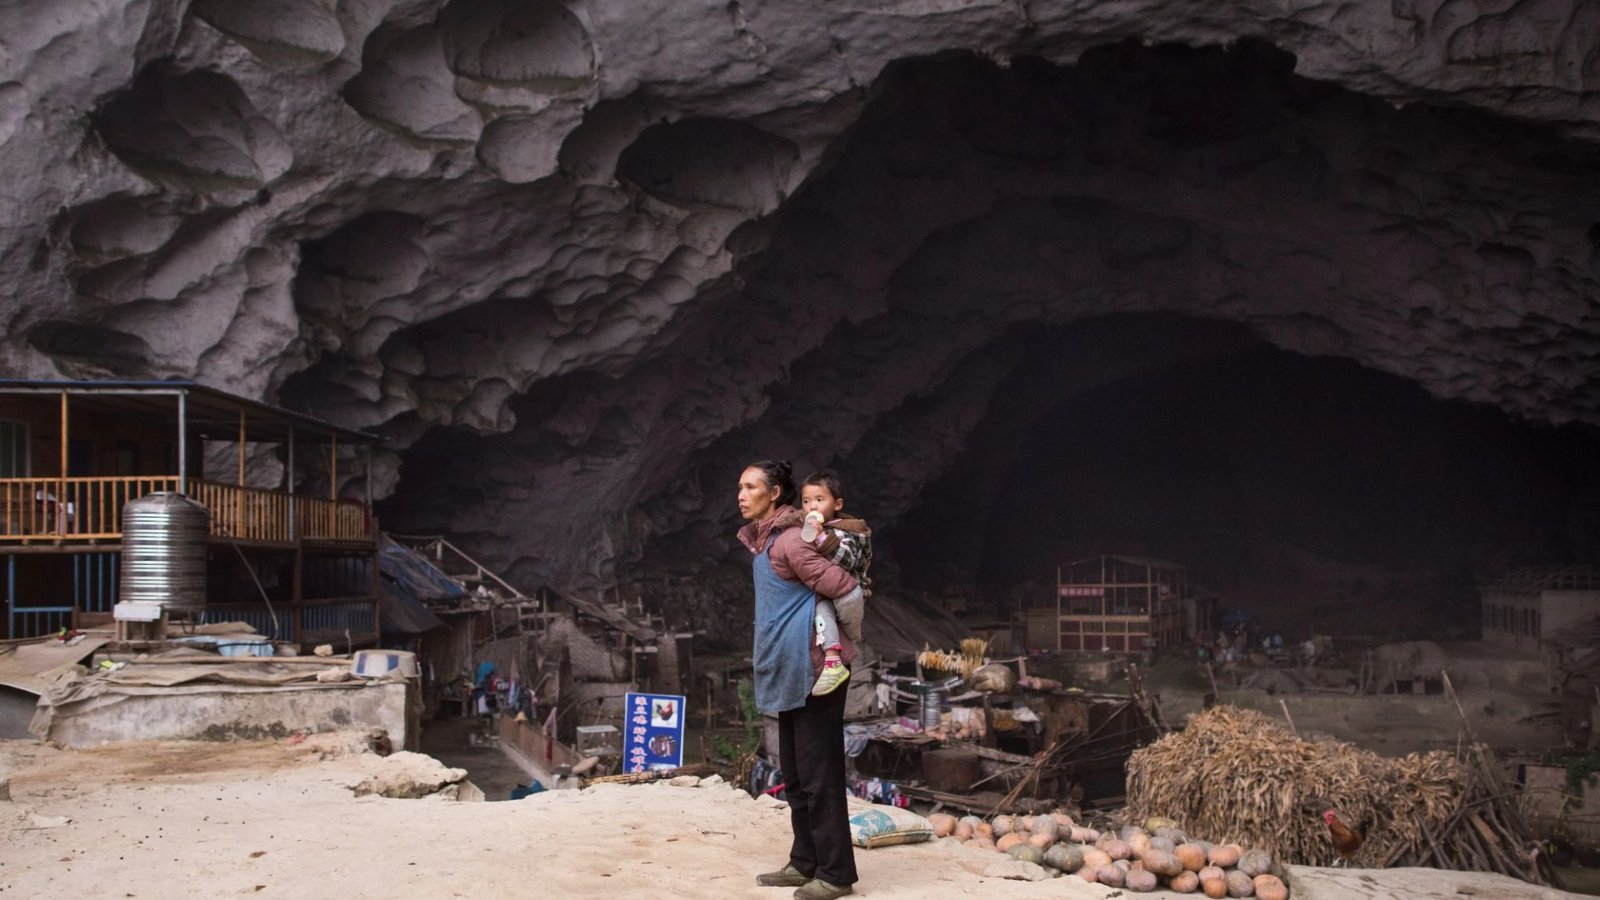 Inside home of the last cave people where entire town is hidden in giant 750ft deep chasm and residents refuse to move